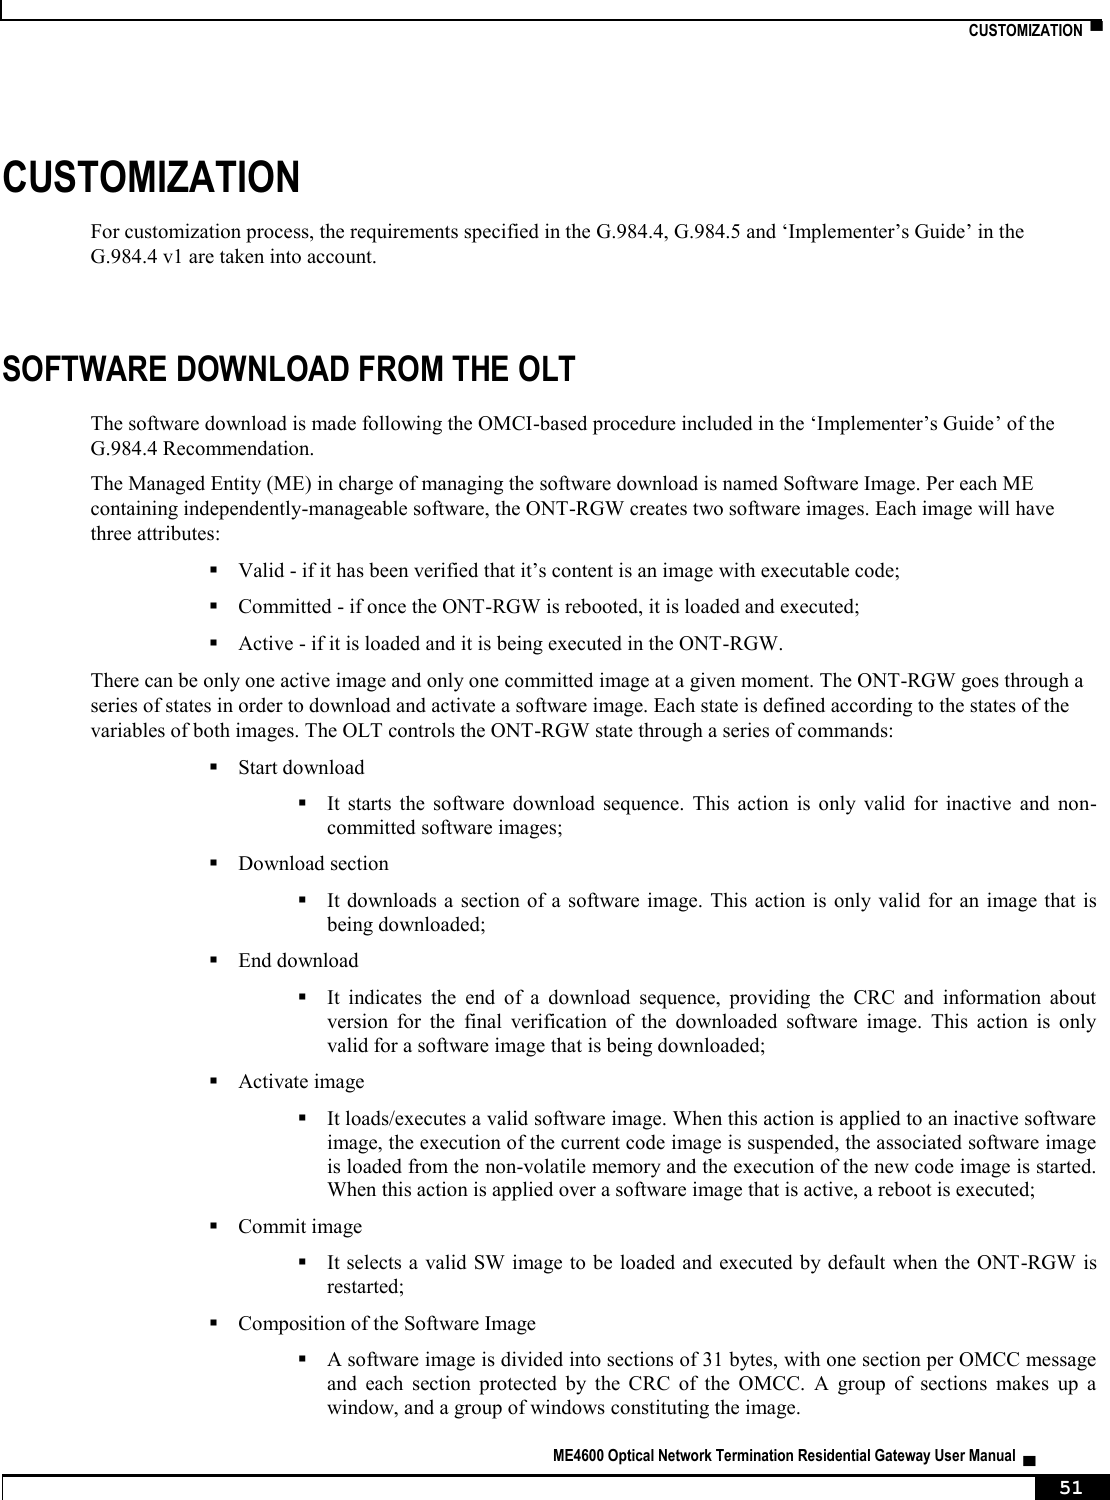    CUSTOMIZATION  ▀   ME4600 Optical Network Termination Residential Gateway User Manual  ▄     51 CUSTOMIZATION For customization process, the requirements specified in the G.984.4, G.984.5 and ‘Implementer’s Guide’ in the G.984.4 v1 are taken into account.  SOFTWARE DOWNLOAD FROM THE OLT The software download is made following the OMCI-based procedure included in the ‘Implementer’s Guide’ of the G.984.4 Recommendation. The Managed Entity (ME) in charge of managing the software download is named Software Image. Per each ME containing independently-manageable software, the ONT-RGW creates two software images. Each image will have three attributes:  Valid - if it has been verified that it’s content is an image with executable code;  Committed - if once the ONT-RGW is rebooted, it is loaded and executed;  Active - if it is loaded and it is being executed in the ONT-RGW. There can be only one active image and only one committed image at a given moment. The ONT-RGW goes through a series of states in order to download and activate a software image. Each state is defined according to the states of the variables of both images. The OLT controls the ONT-RGW state through a series of commands:  Start download  It  starts  the  software  download  sequence.  This  action  is  only  valid  for  inactive  and  non-committed software images;  Download section  It downloads a section of a  software image. This action  is  only valid for an  image that is being downloaded;  End download  It  indicates  the  end  of  a  download  sequence,  providing  the  CRC  and  information  about version  for  the  final  verification  of  the  downloaded  software  image.  This  action  is  only valid for a software image that is being downloaded;  Activate image  It loads/executes a valid software image. When this action is applied to an inactive software image, the execution of the current code image is suspended, the associated software image is loaded from the non-volatile memory and the execution of the new code image is started. When this action is applied over a software image that is active, a reboot is executed;  Commit image  It selects a valid SW image to be loaded and executed by default when the ONT-RGW  is restarted;  Composition of the Software Image  A software image is divided into sections of 31 bytes, with one section per OMCC message and  each  section  protected  by  the  CRC  of  the  OMCC.  A  group  of  sections  makes  up  a window, and a group of windows constituting the image. 